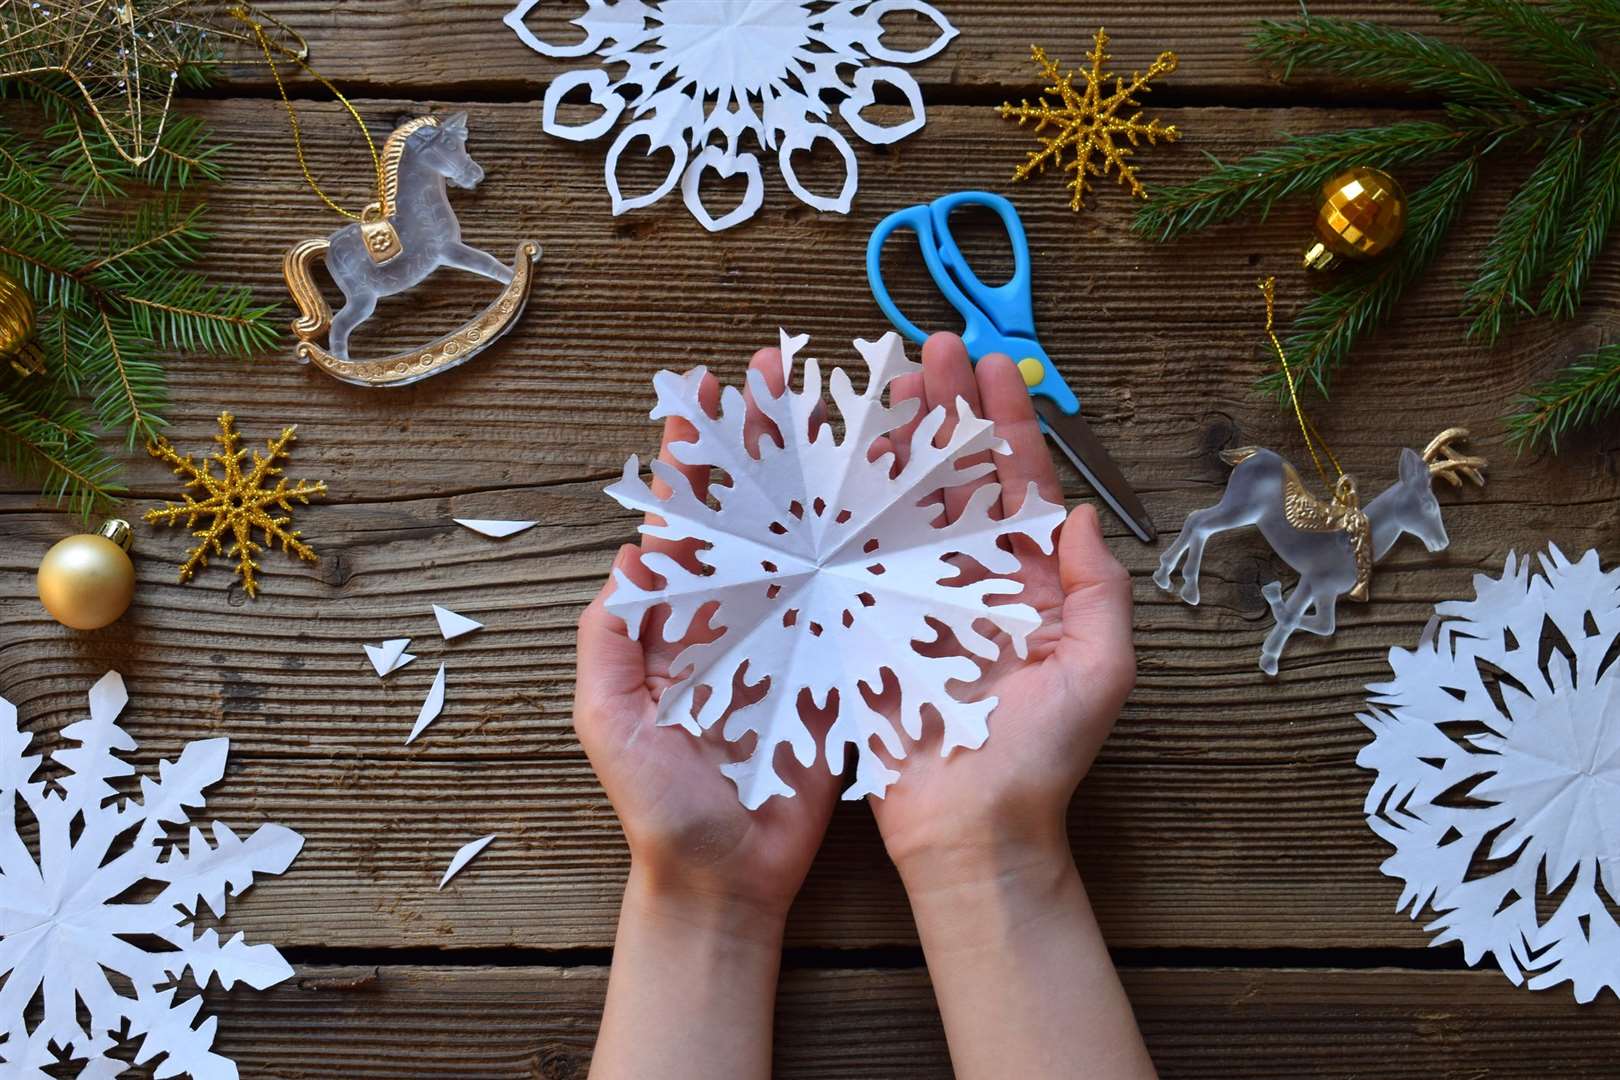 Elves likes to make simple paper snowflakes